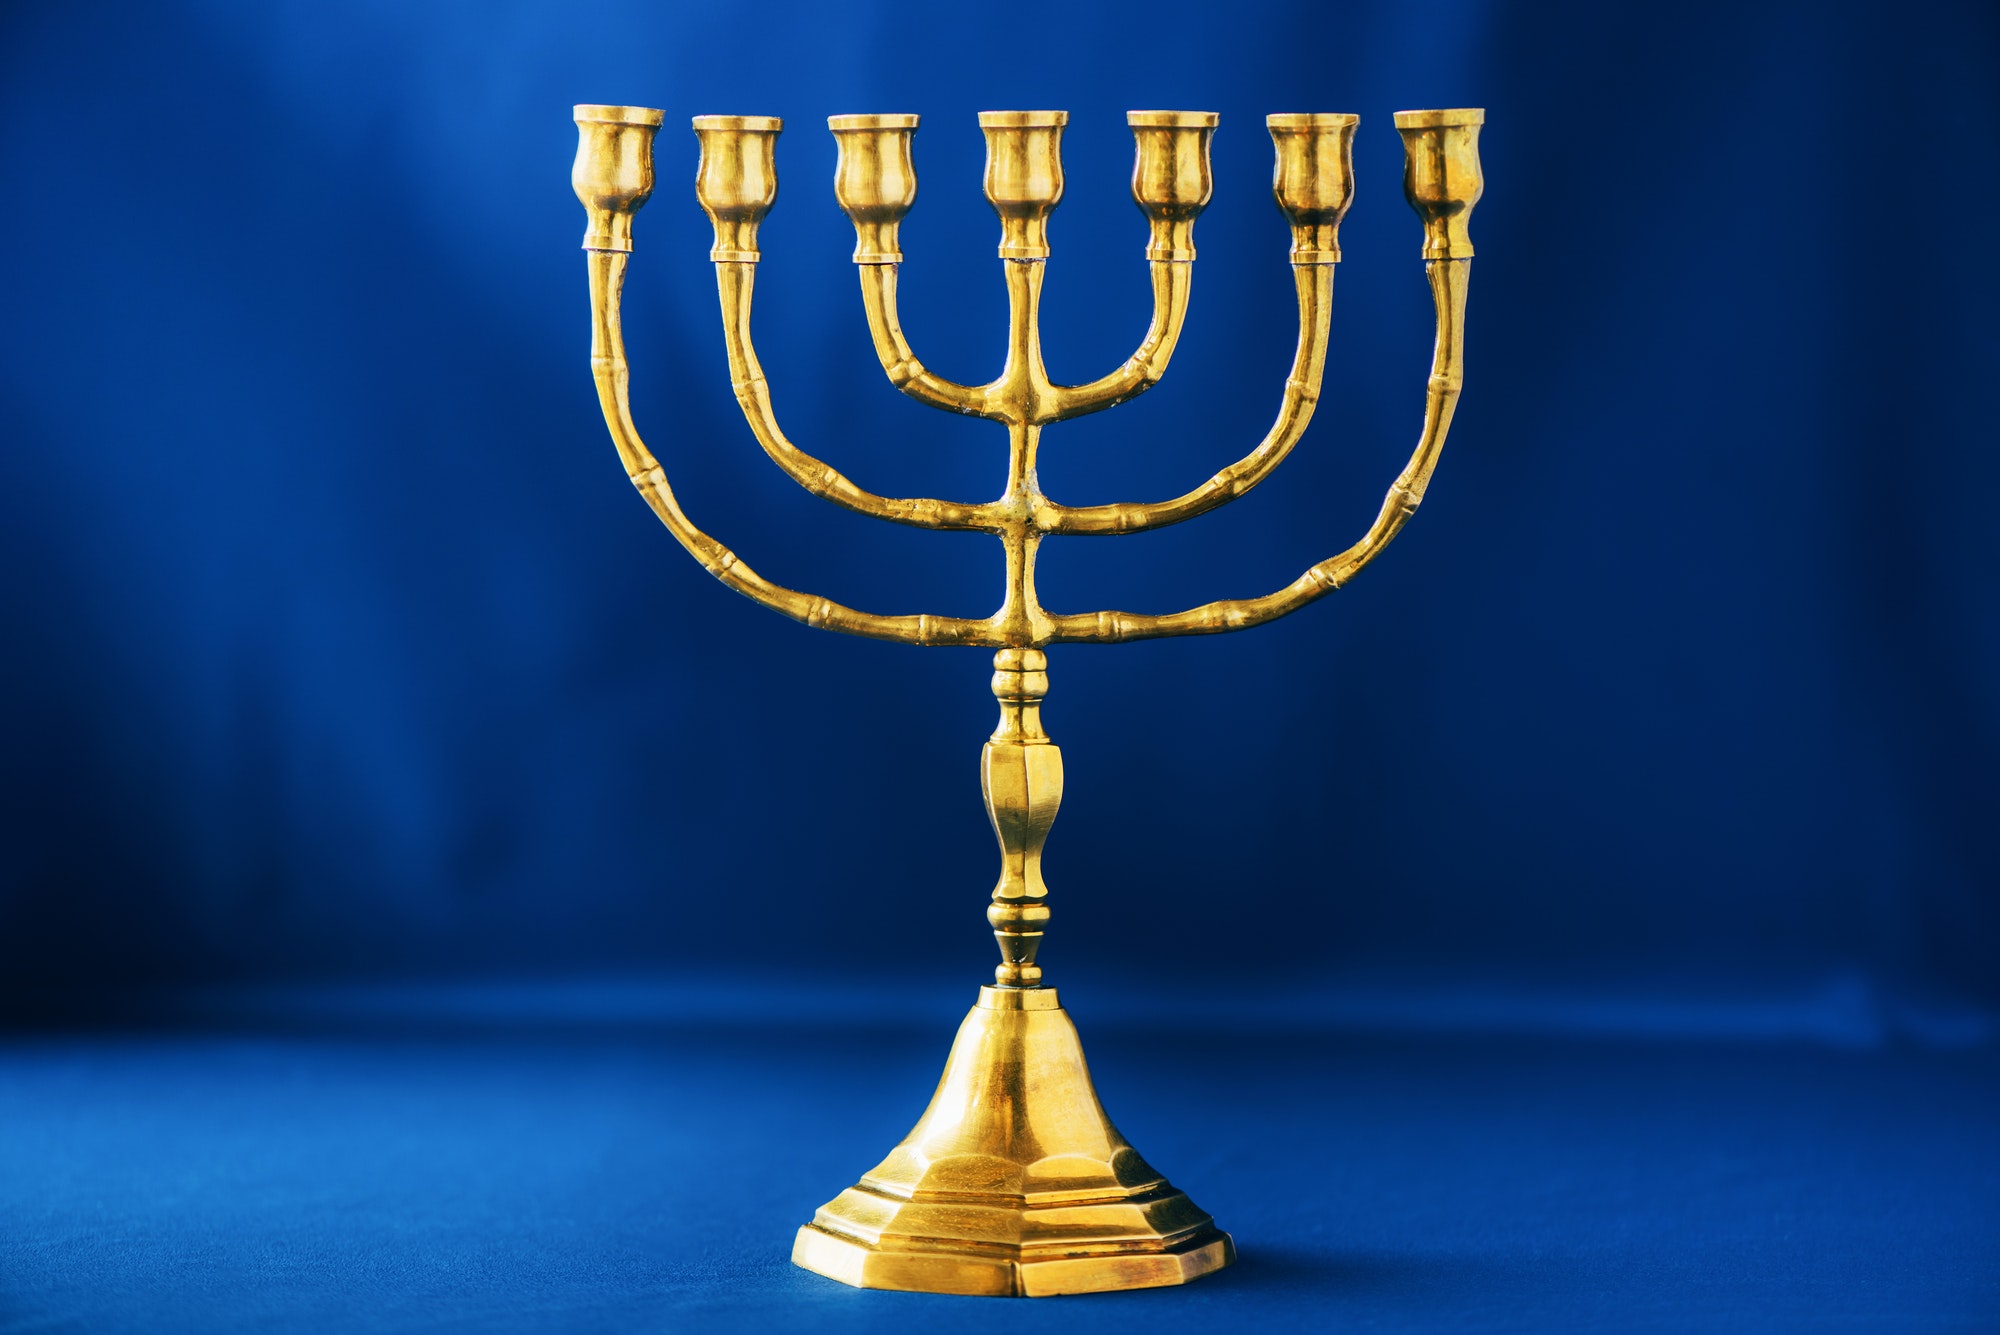 Golden hanukkah menorah on blue background. Jewish holiday banner with copy space. Ancient ritual